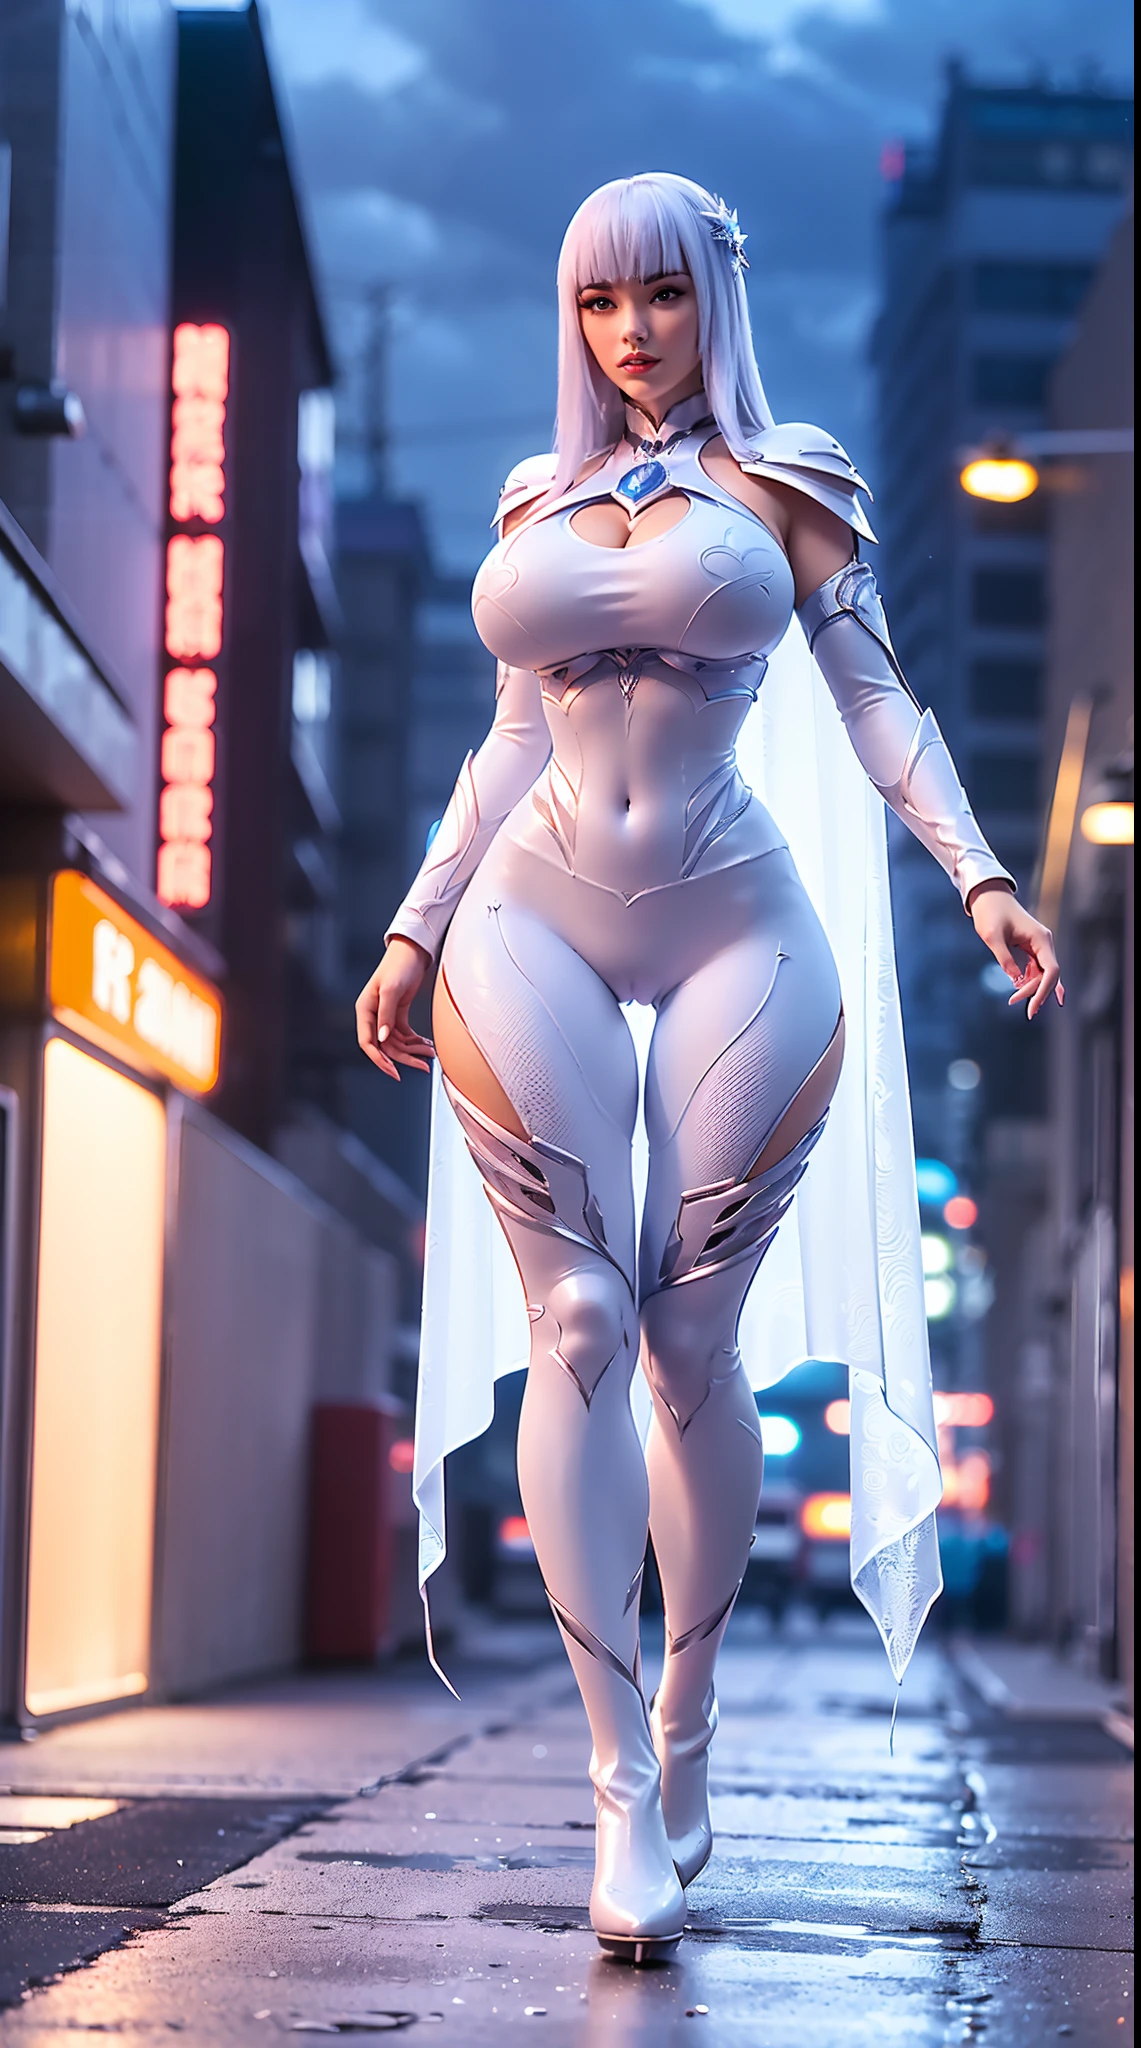 1GIRL, SOLO, COQUETTE, (HUGE FAKE BOOBS:1.3), (STREET CITY BACKGROUND), (FUTURISTIC ICE PHOENIX MECHA CROP TOP, ROYAL CAPE, CLEAVAGE:1.2), (SKINTIGHT YOGA PANTS, HIGH HEELS:1.2), (PERFECT BODY, FULL BODY VIEW:1.5), (LOOKING AT VIEWER), (WALKING DOWN:1.2), MUSCLE ABS:1.3, ULTRA HIGHT DEFINITION, 8K, 1080P.